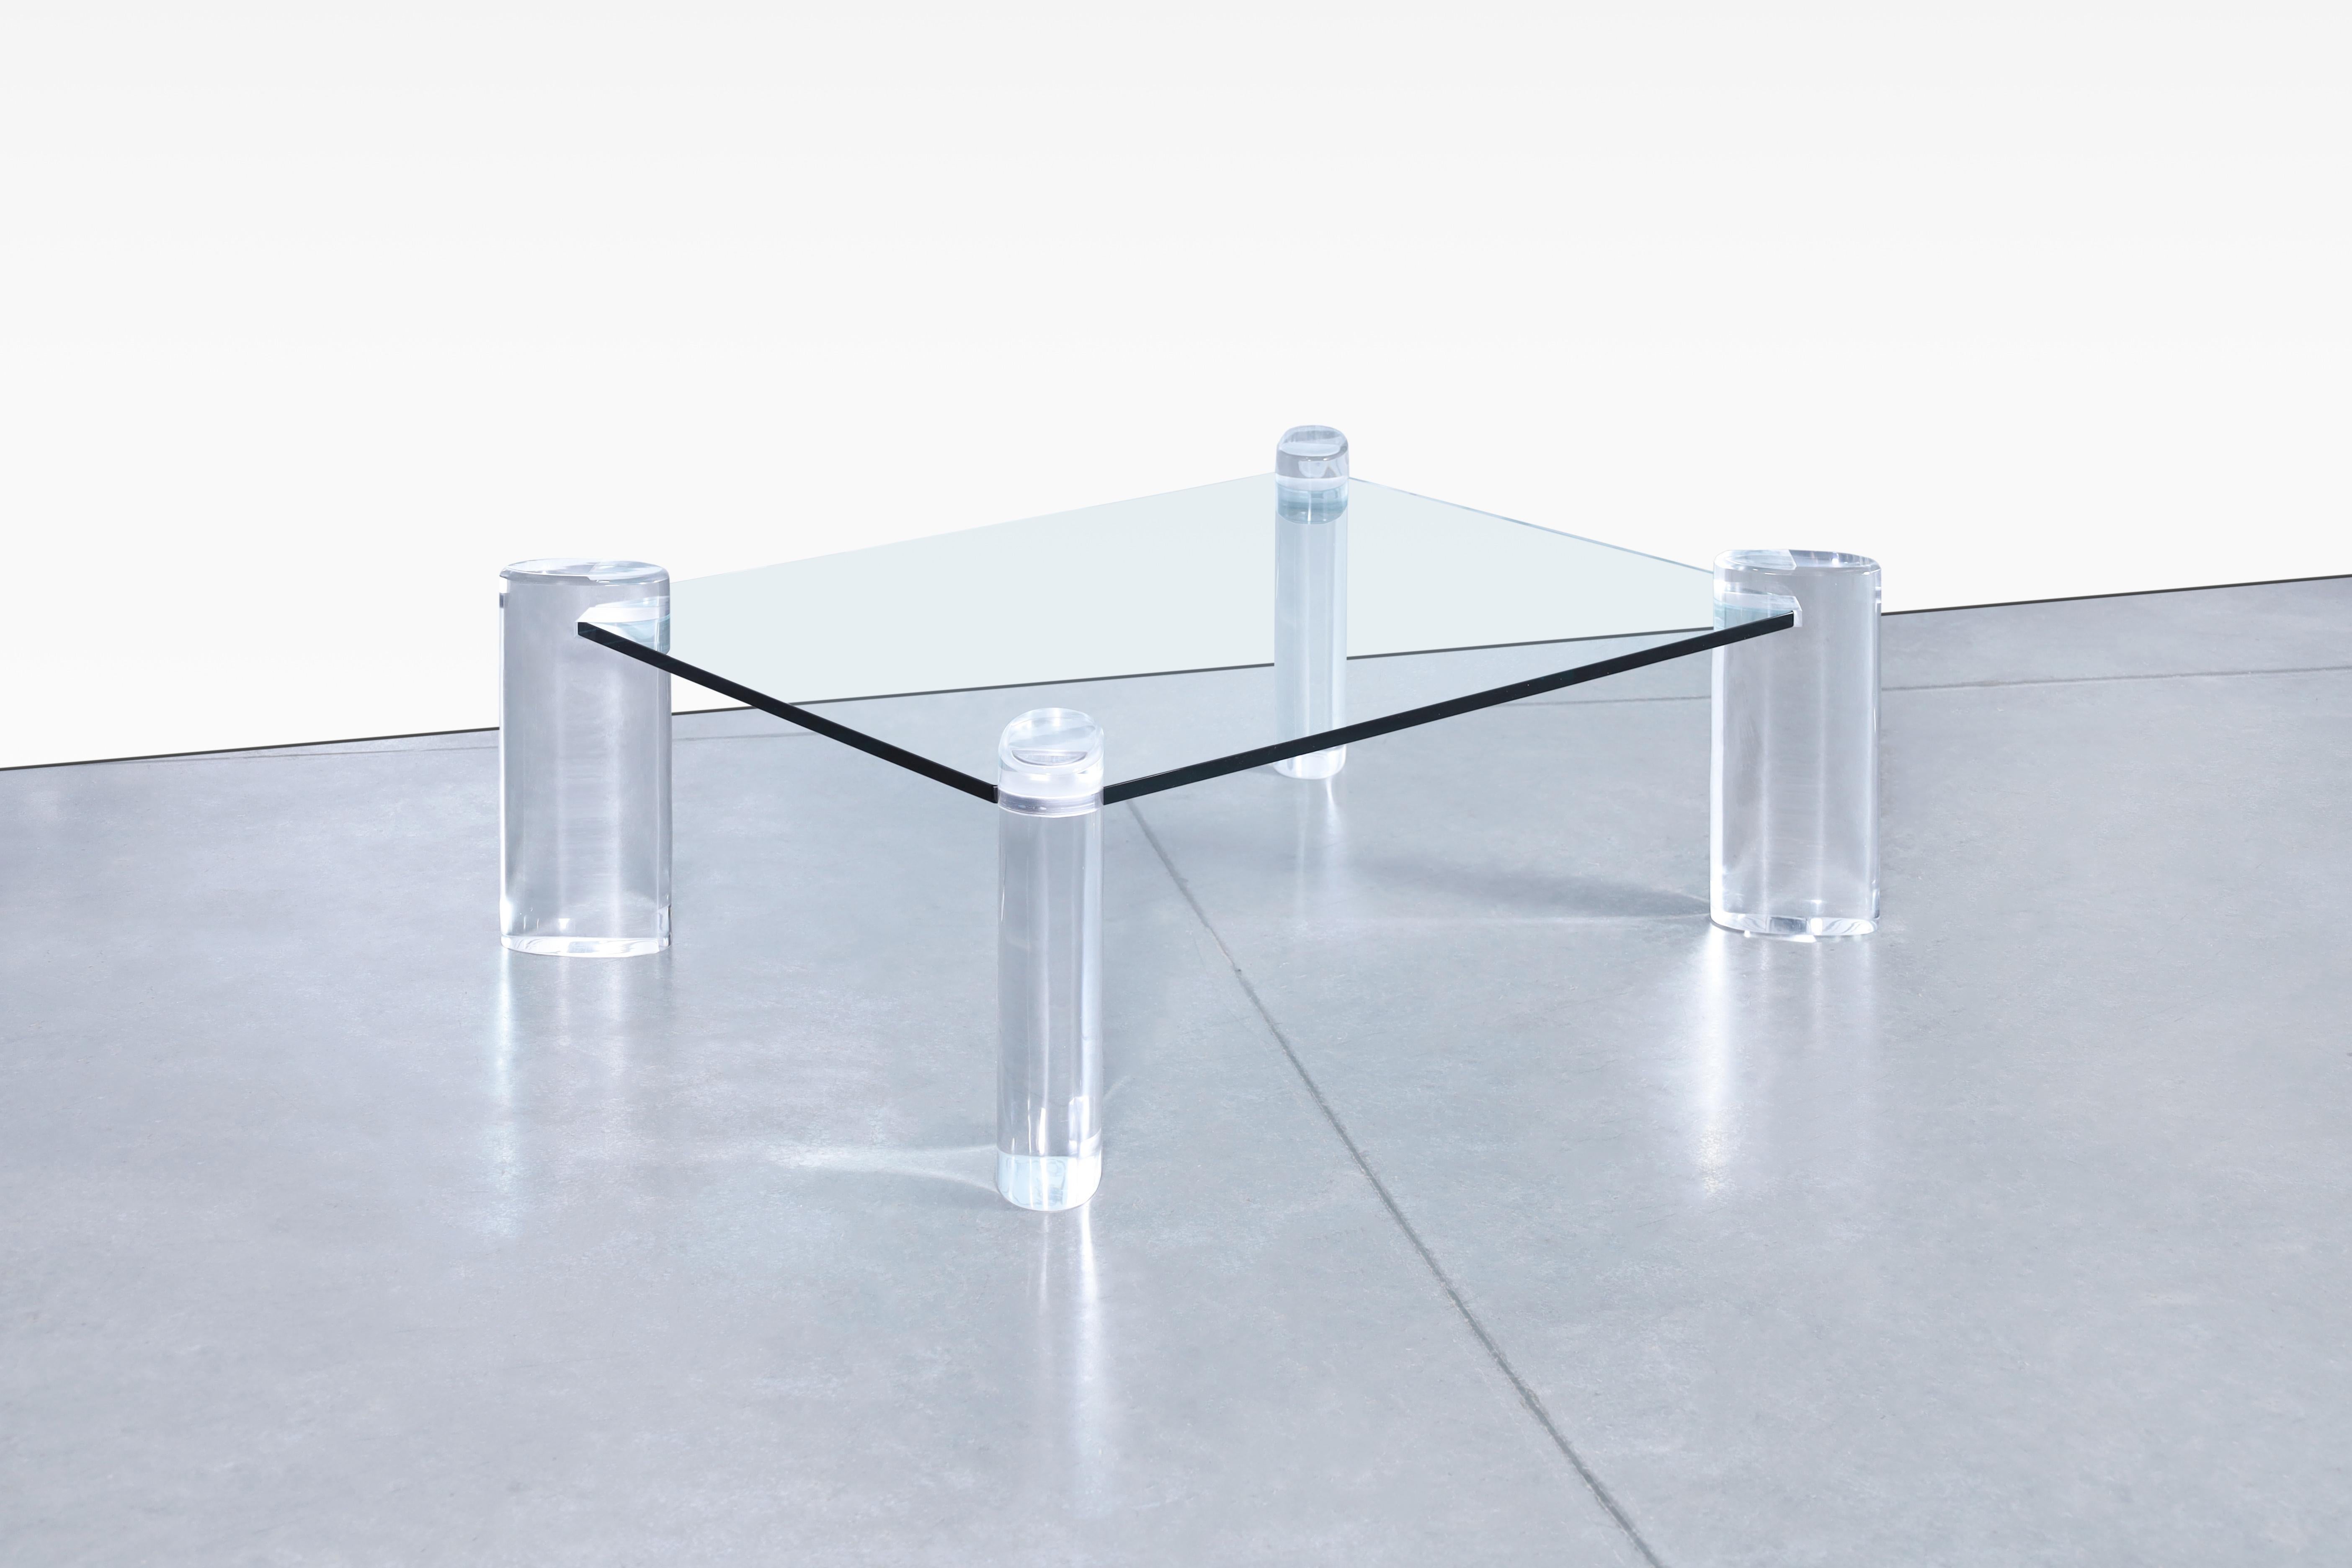 Wonderful vintage lucite and glass coffee table designed by the iconic designer Karl Springer in the United States, circa 1980s. This coffee table has a unique design in which its construction materials and the shape of its design stand out. Created